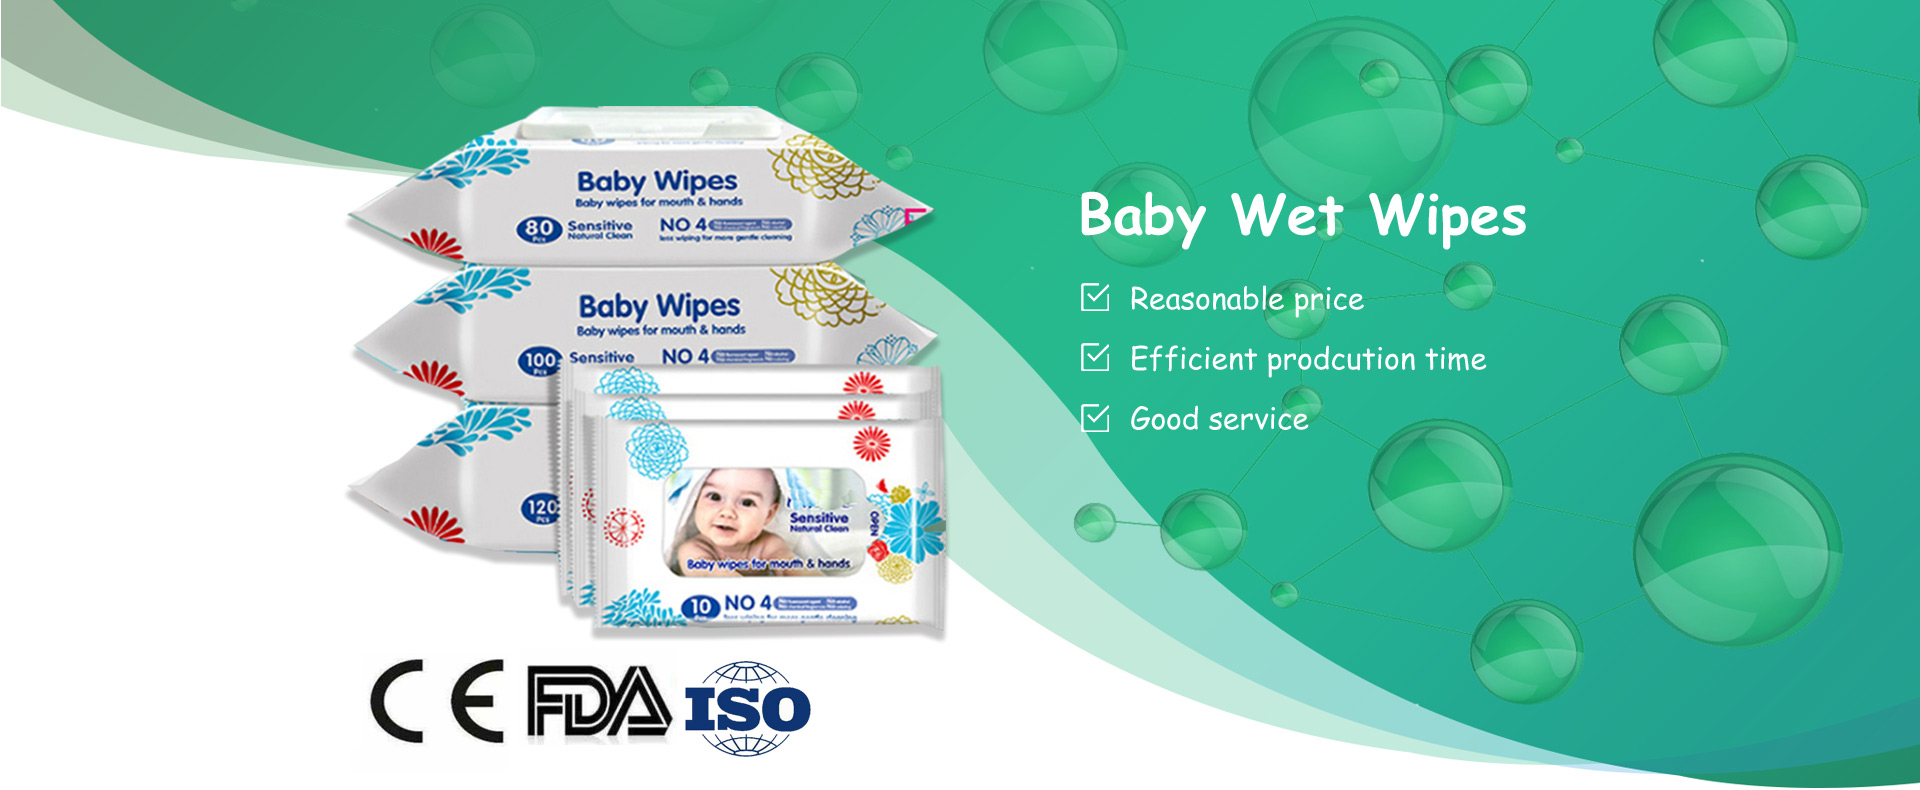 How do the baby wet wipes work?